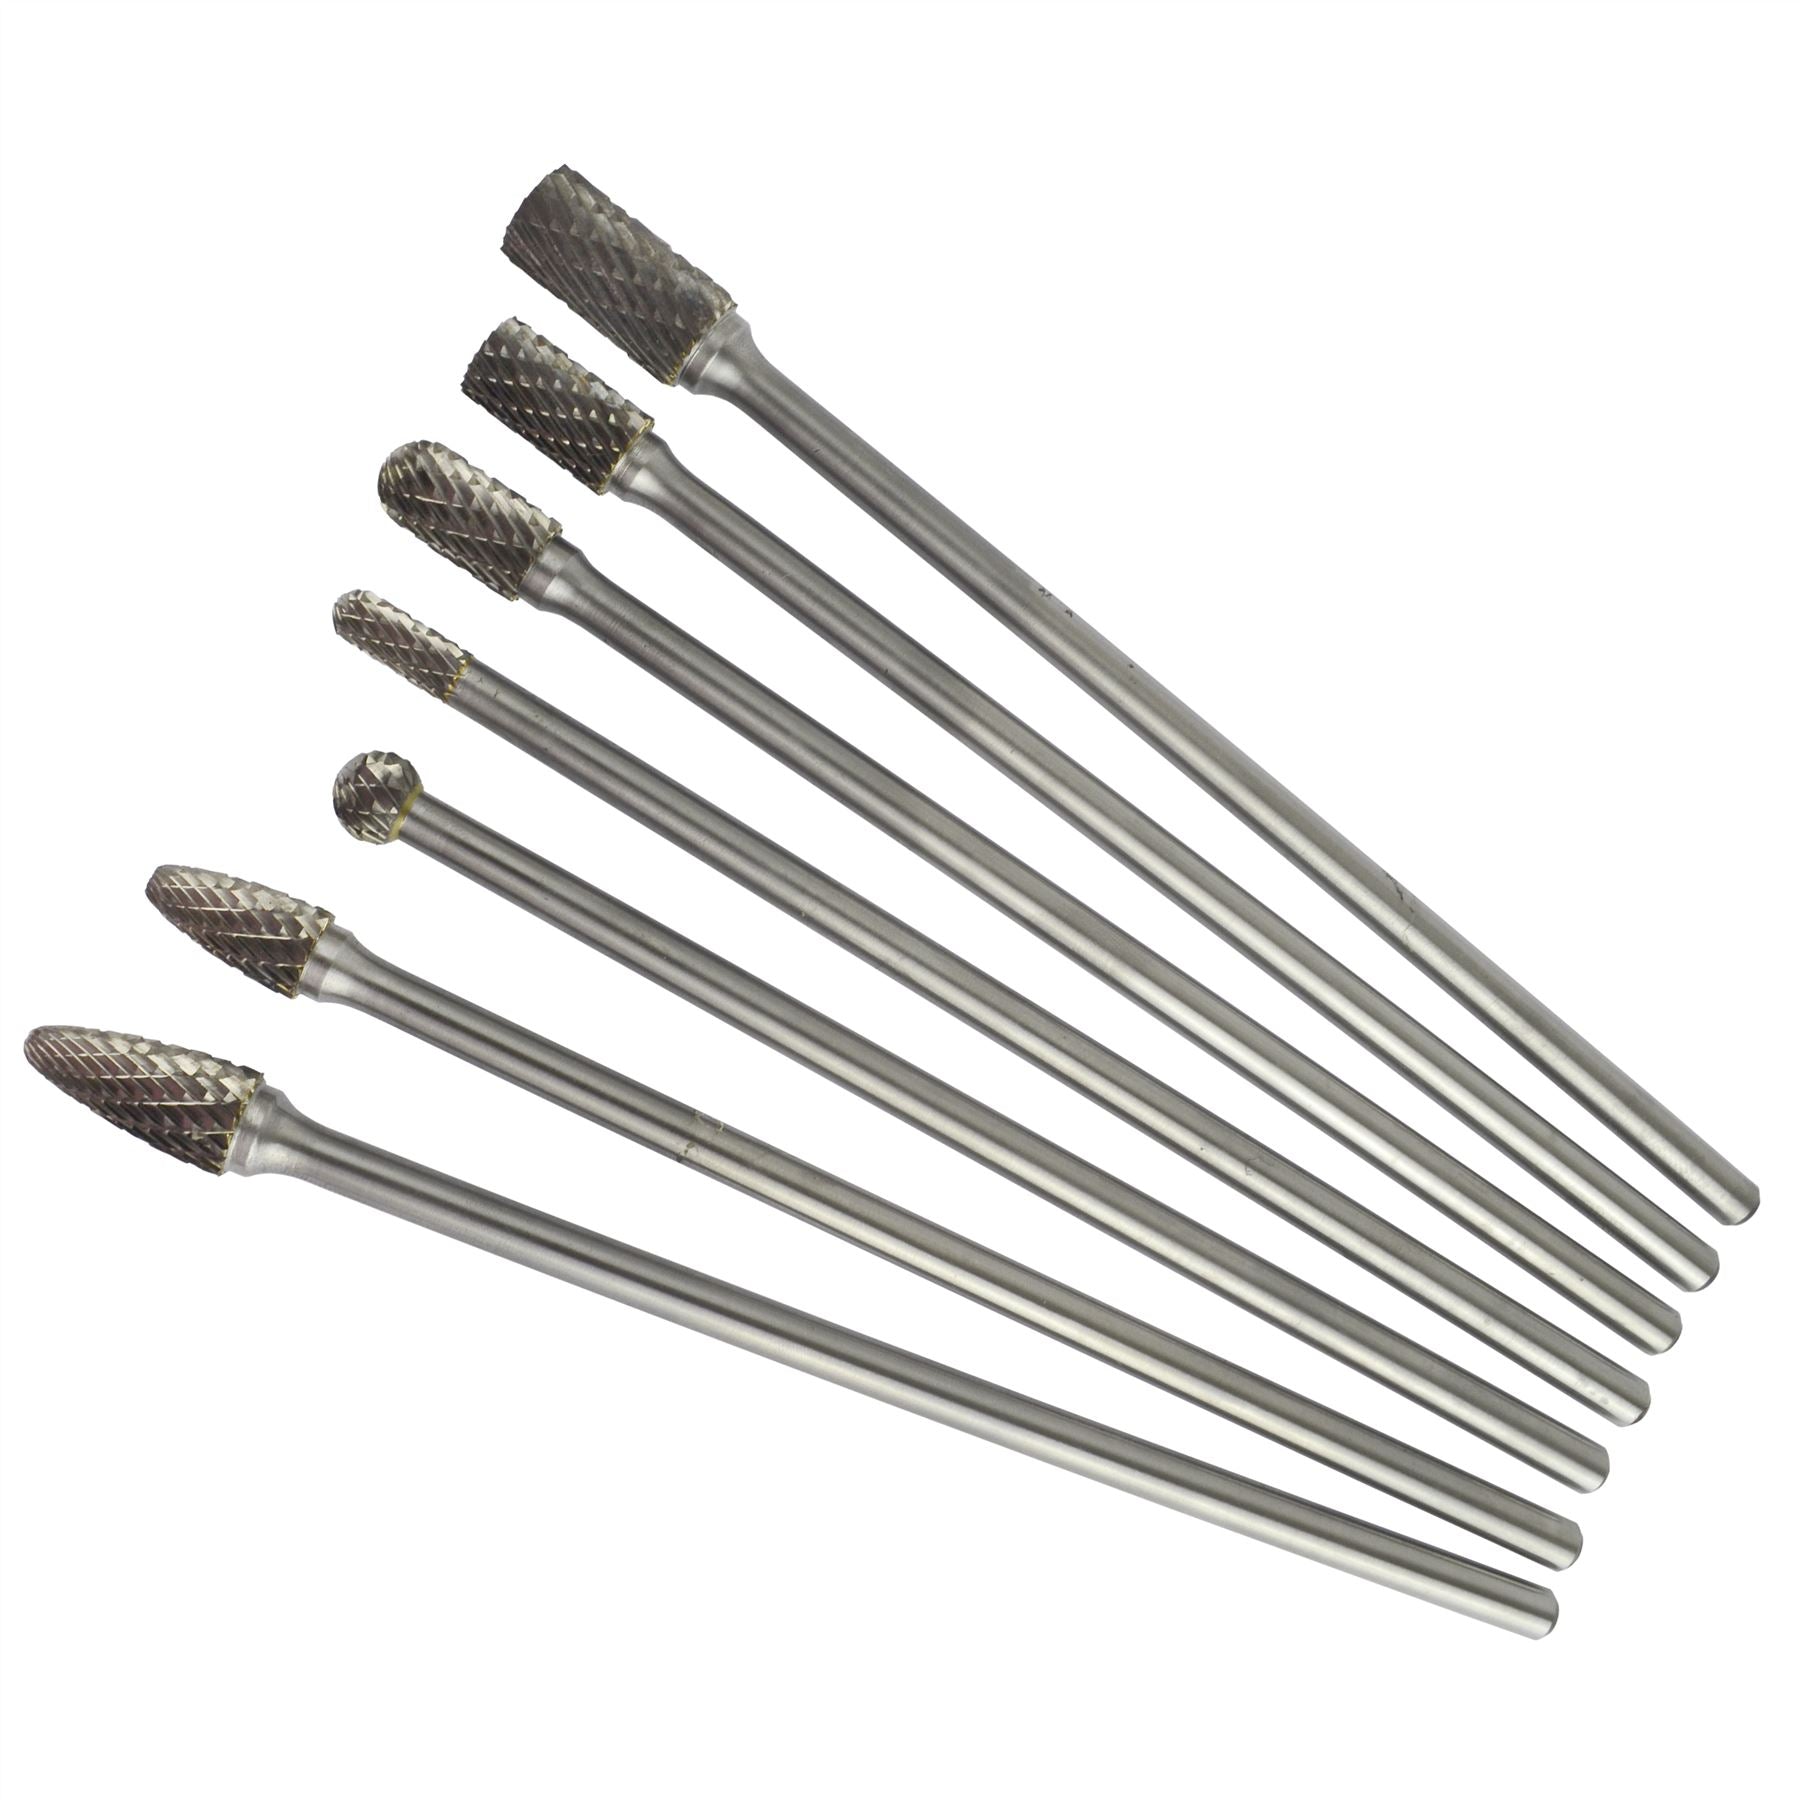 7pc Extra Long Tungsten Carbide Burr Files Remover Removal Hole Enlarger Set